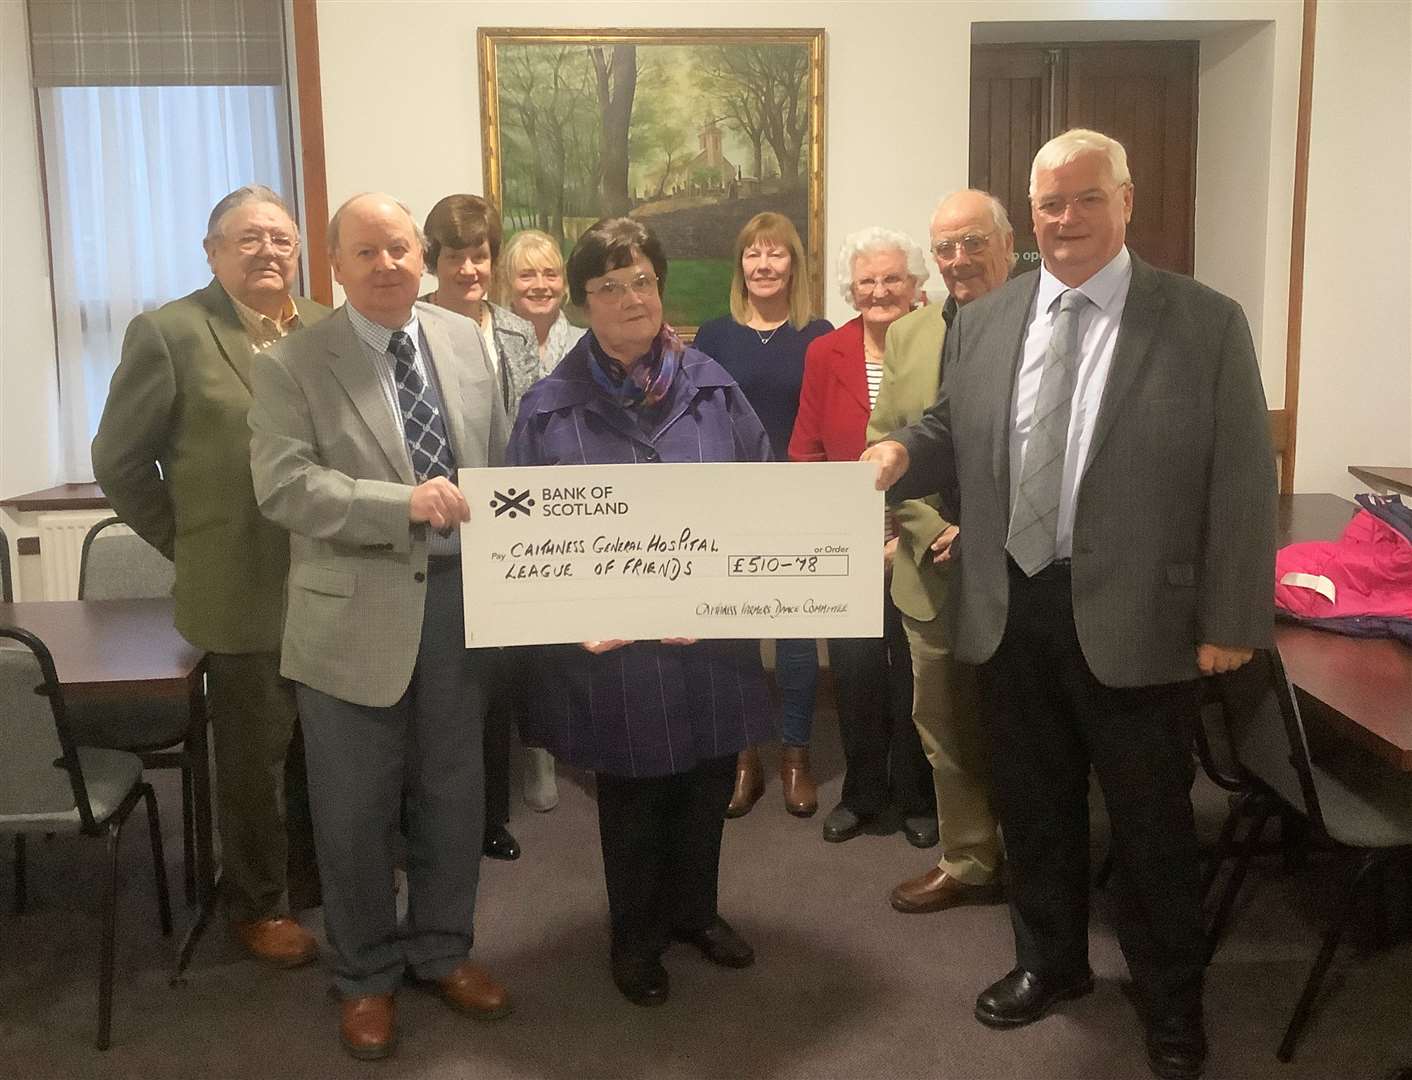 Lorette Mackay, treasurer of the Caithness General Hospital League of Friends, accepting the cheque from members of the Caithness Farmers Dance Committee, with other League of Friends representatives looking on.